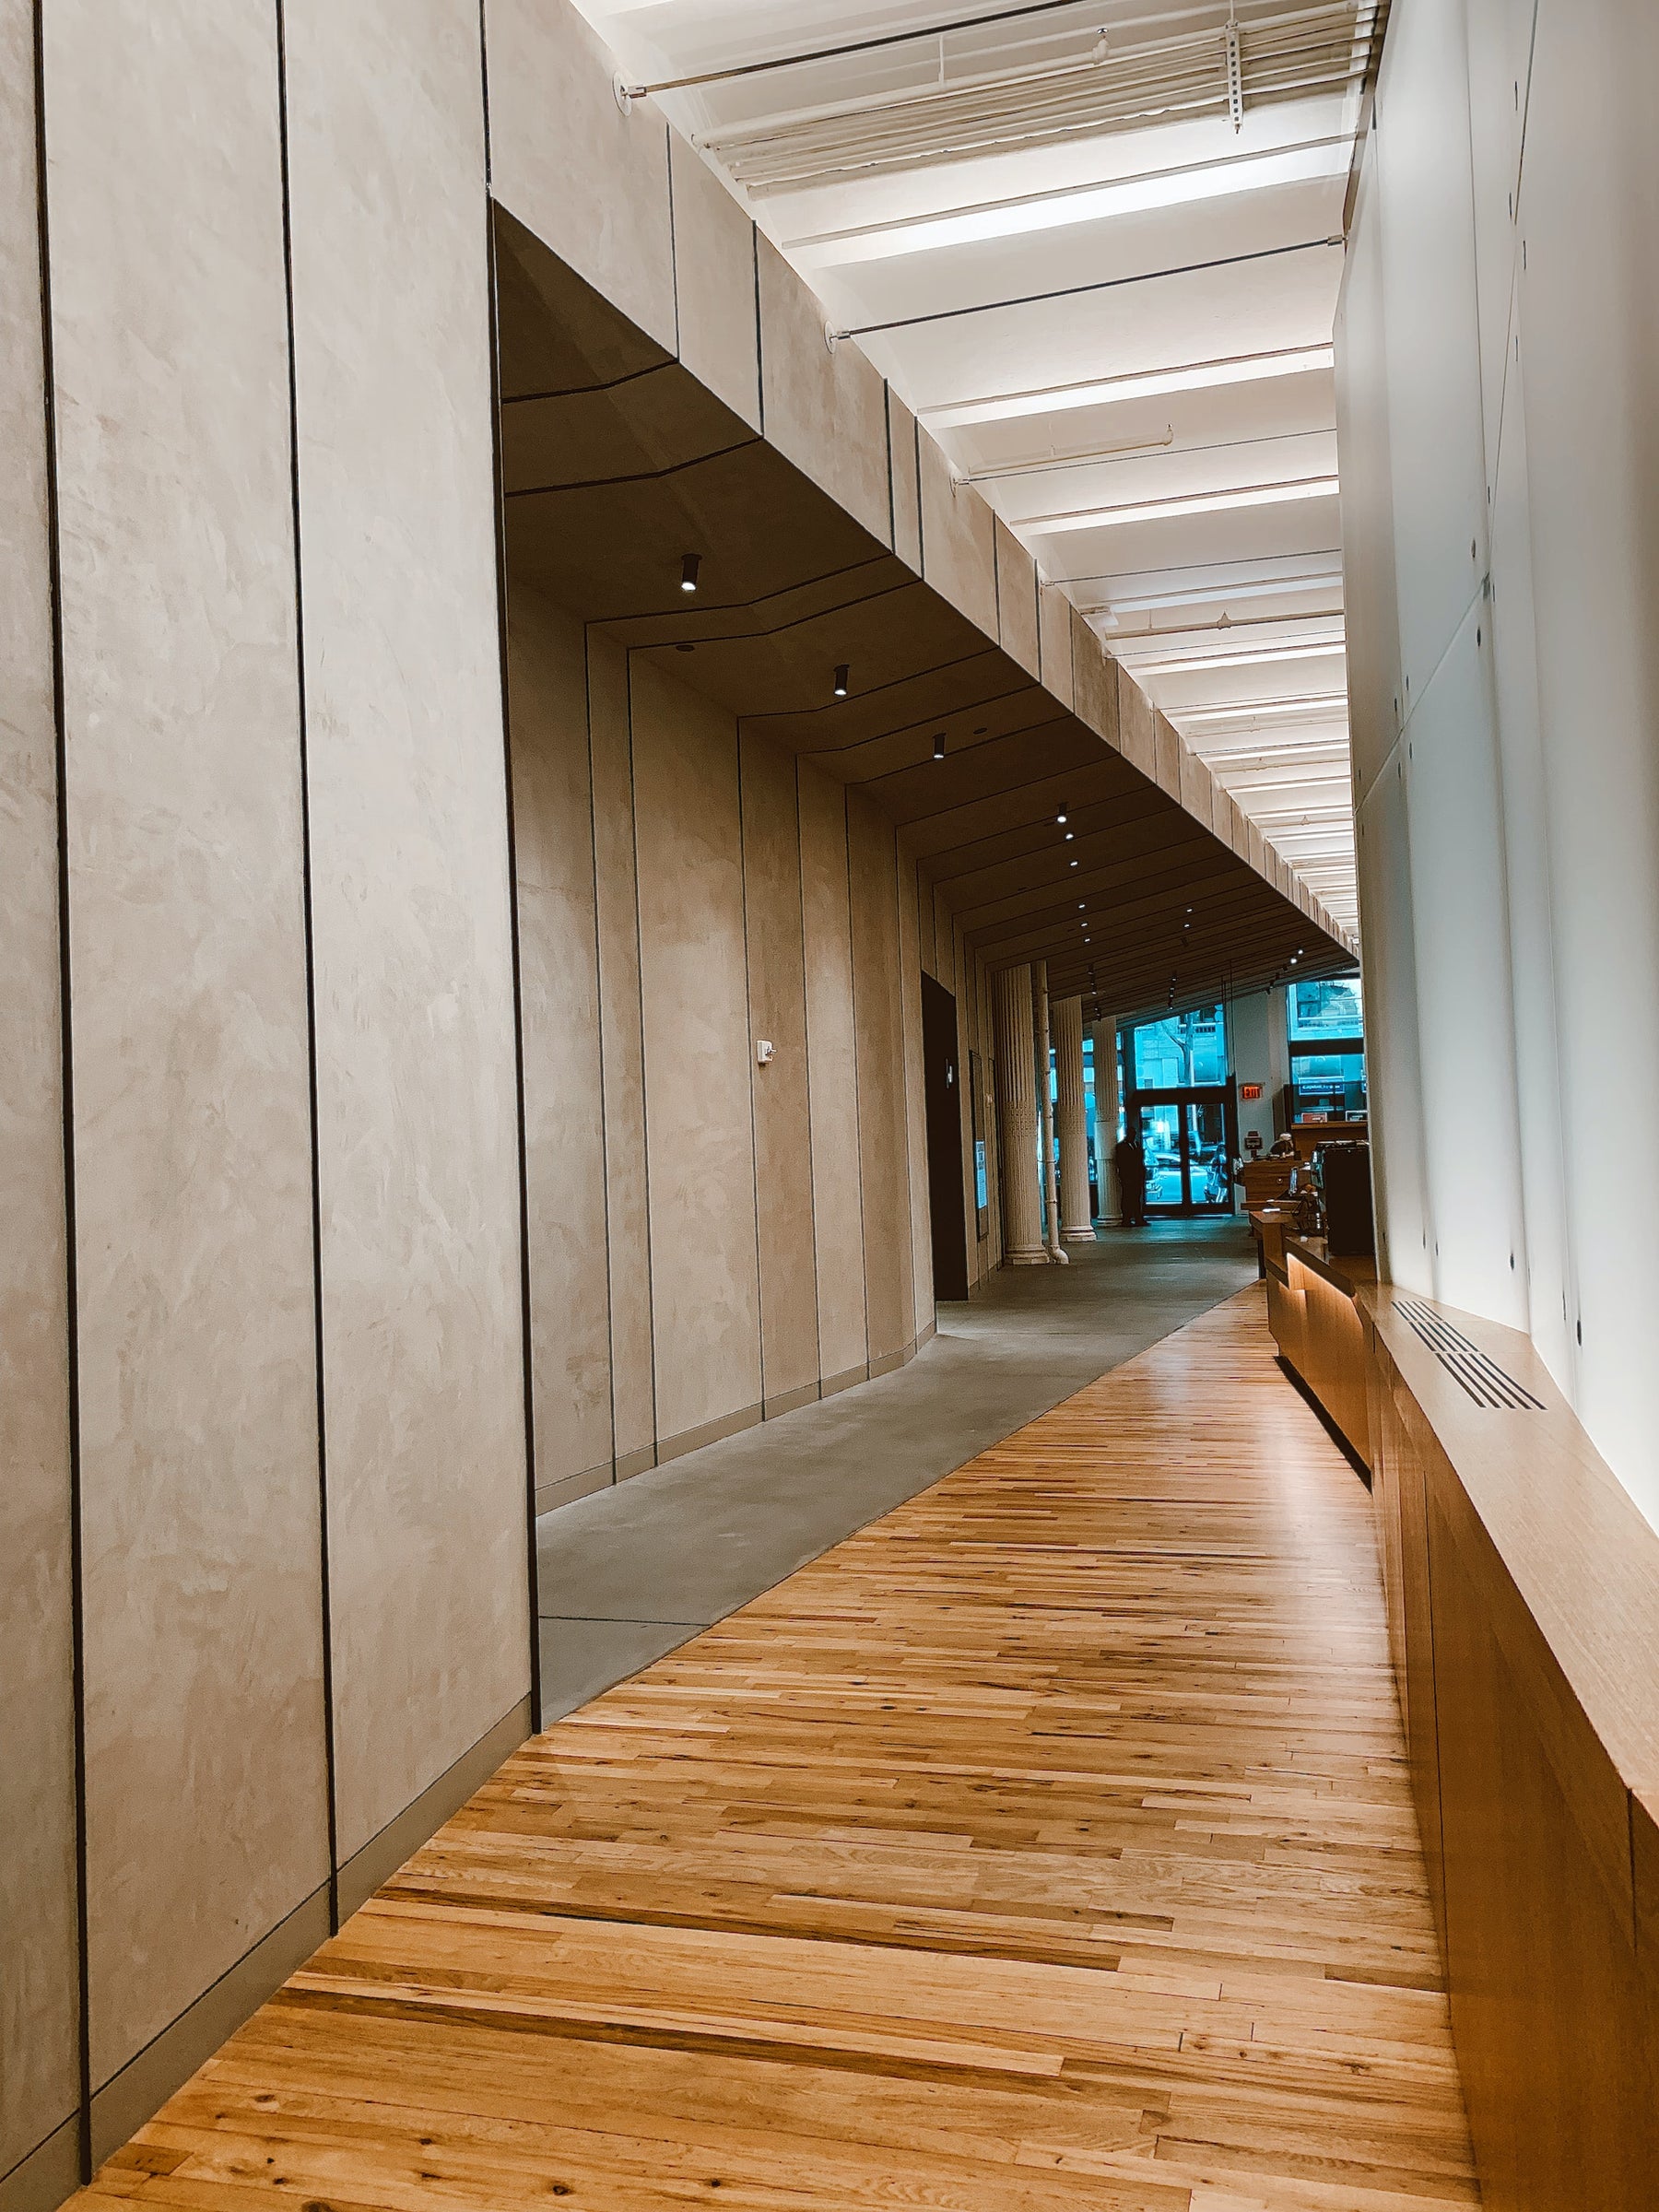 Wood Flooring in Commercial Spaces: Durability and Design